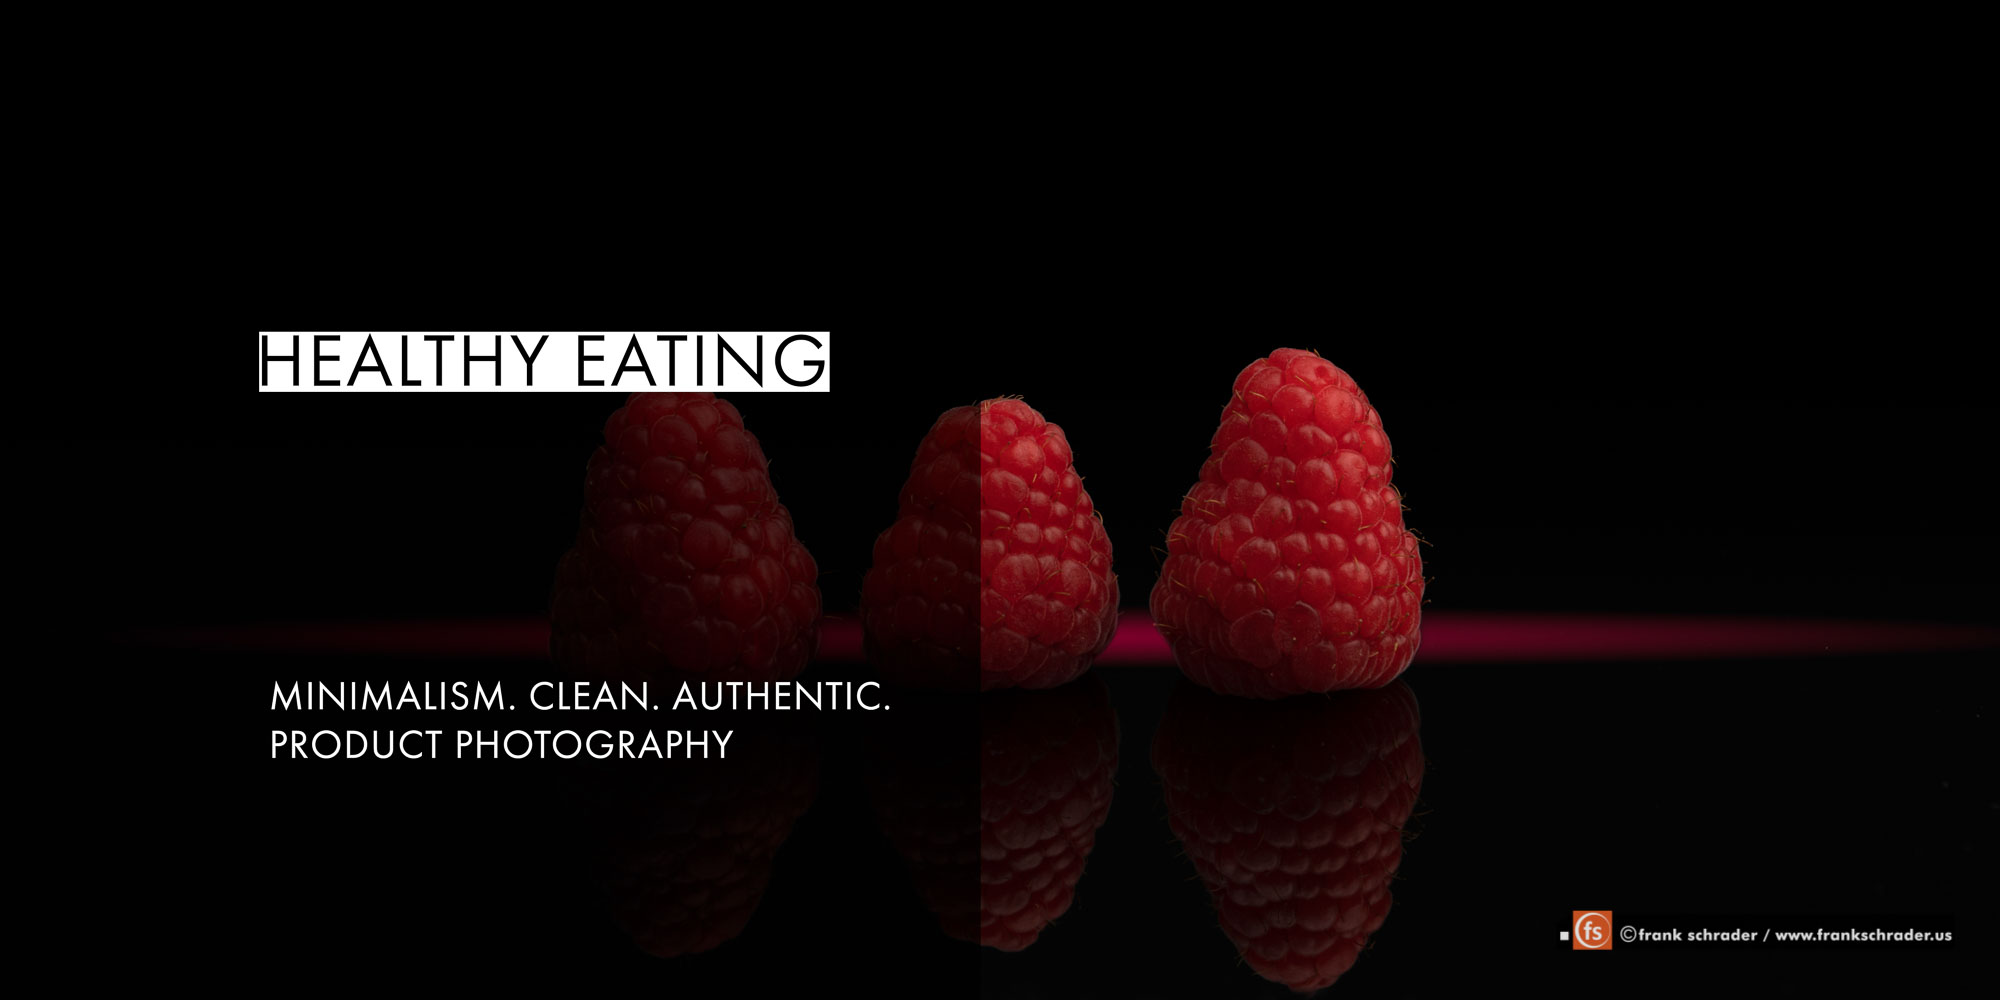 Photo for a Healthy Eating Campaign. Pure black background, reflections, light effect.